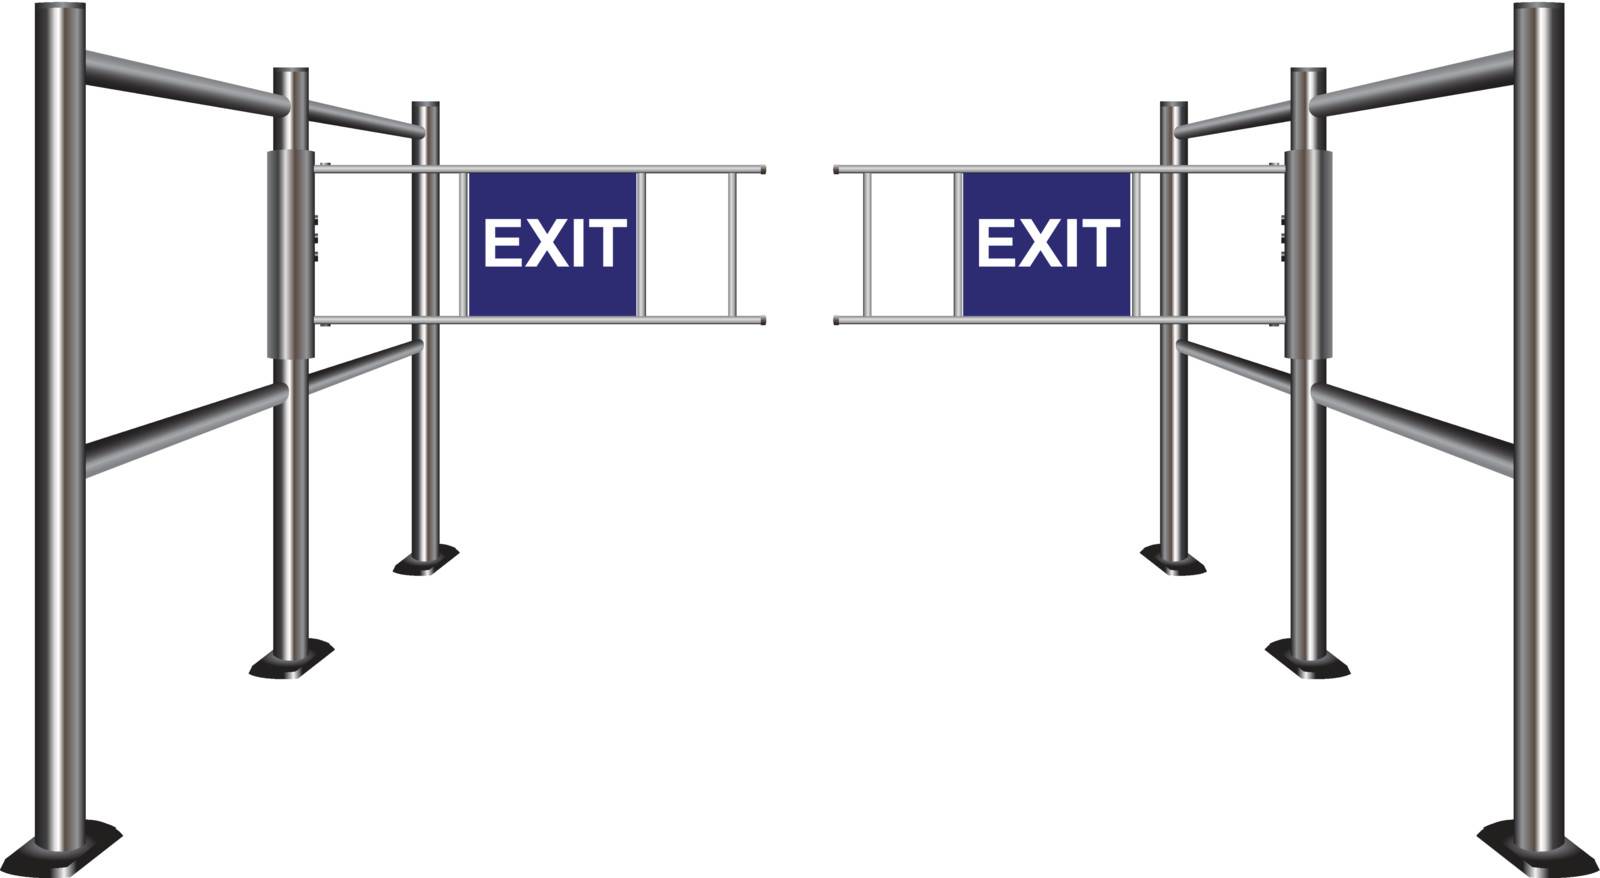 Turnstile indicating the direction of the exit. Vector illustration.